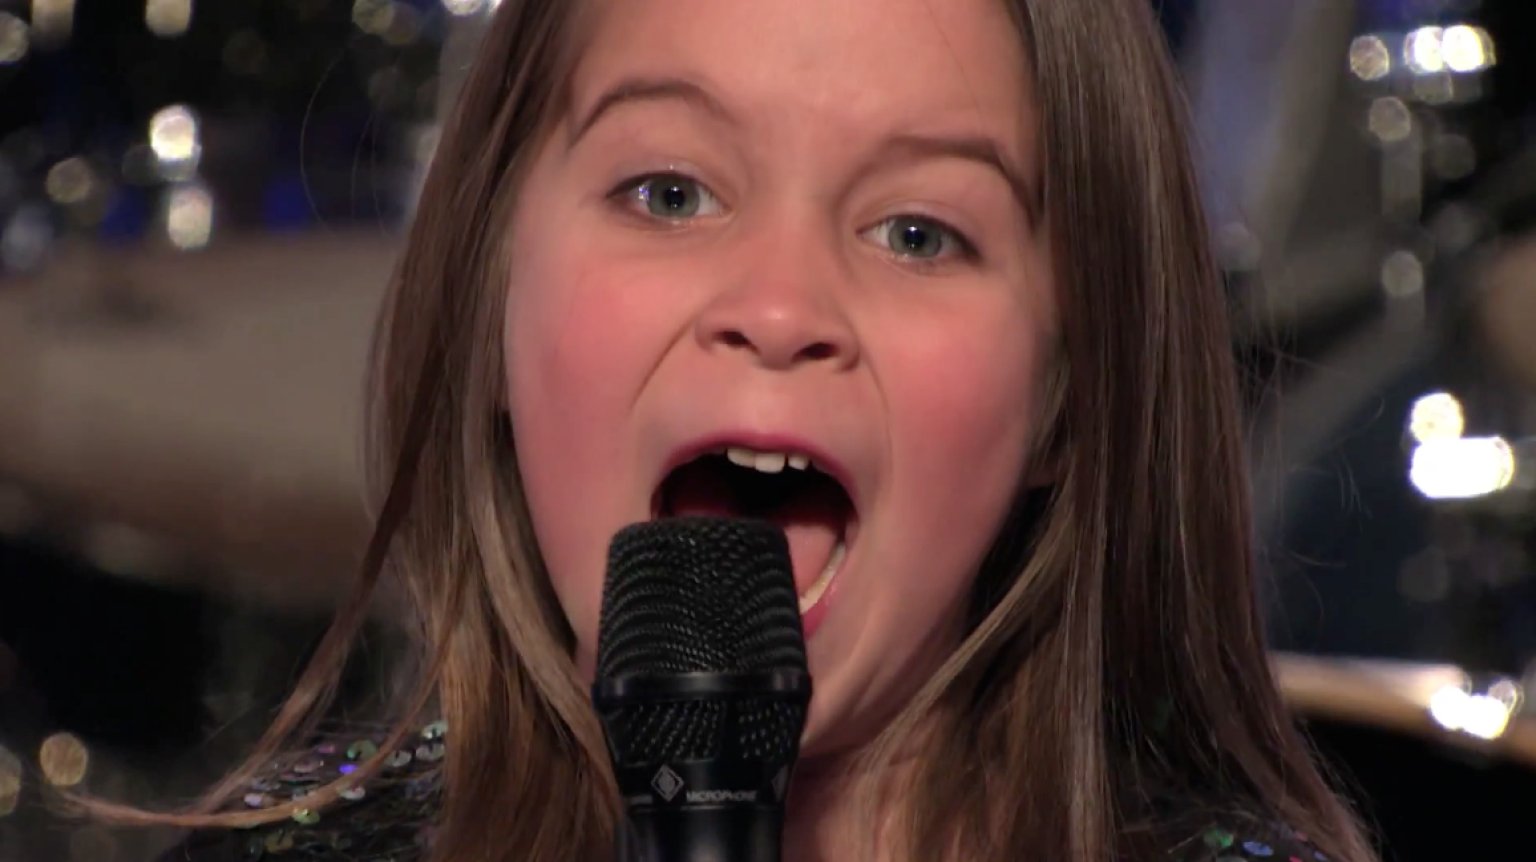 America S Got Talent Aaralyn O Neil Six Year Old Heavy Metal Singer Wows With Zombie Skin